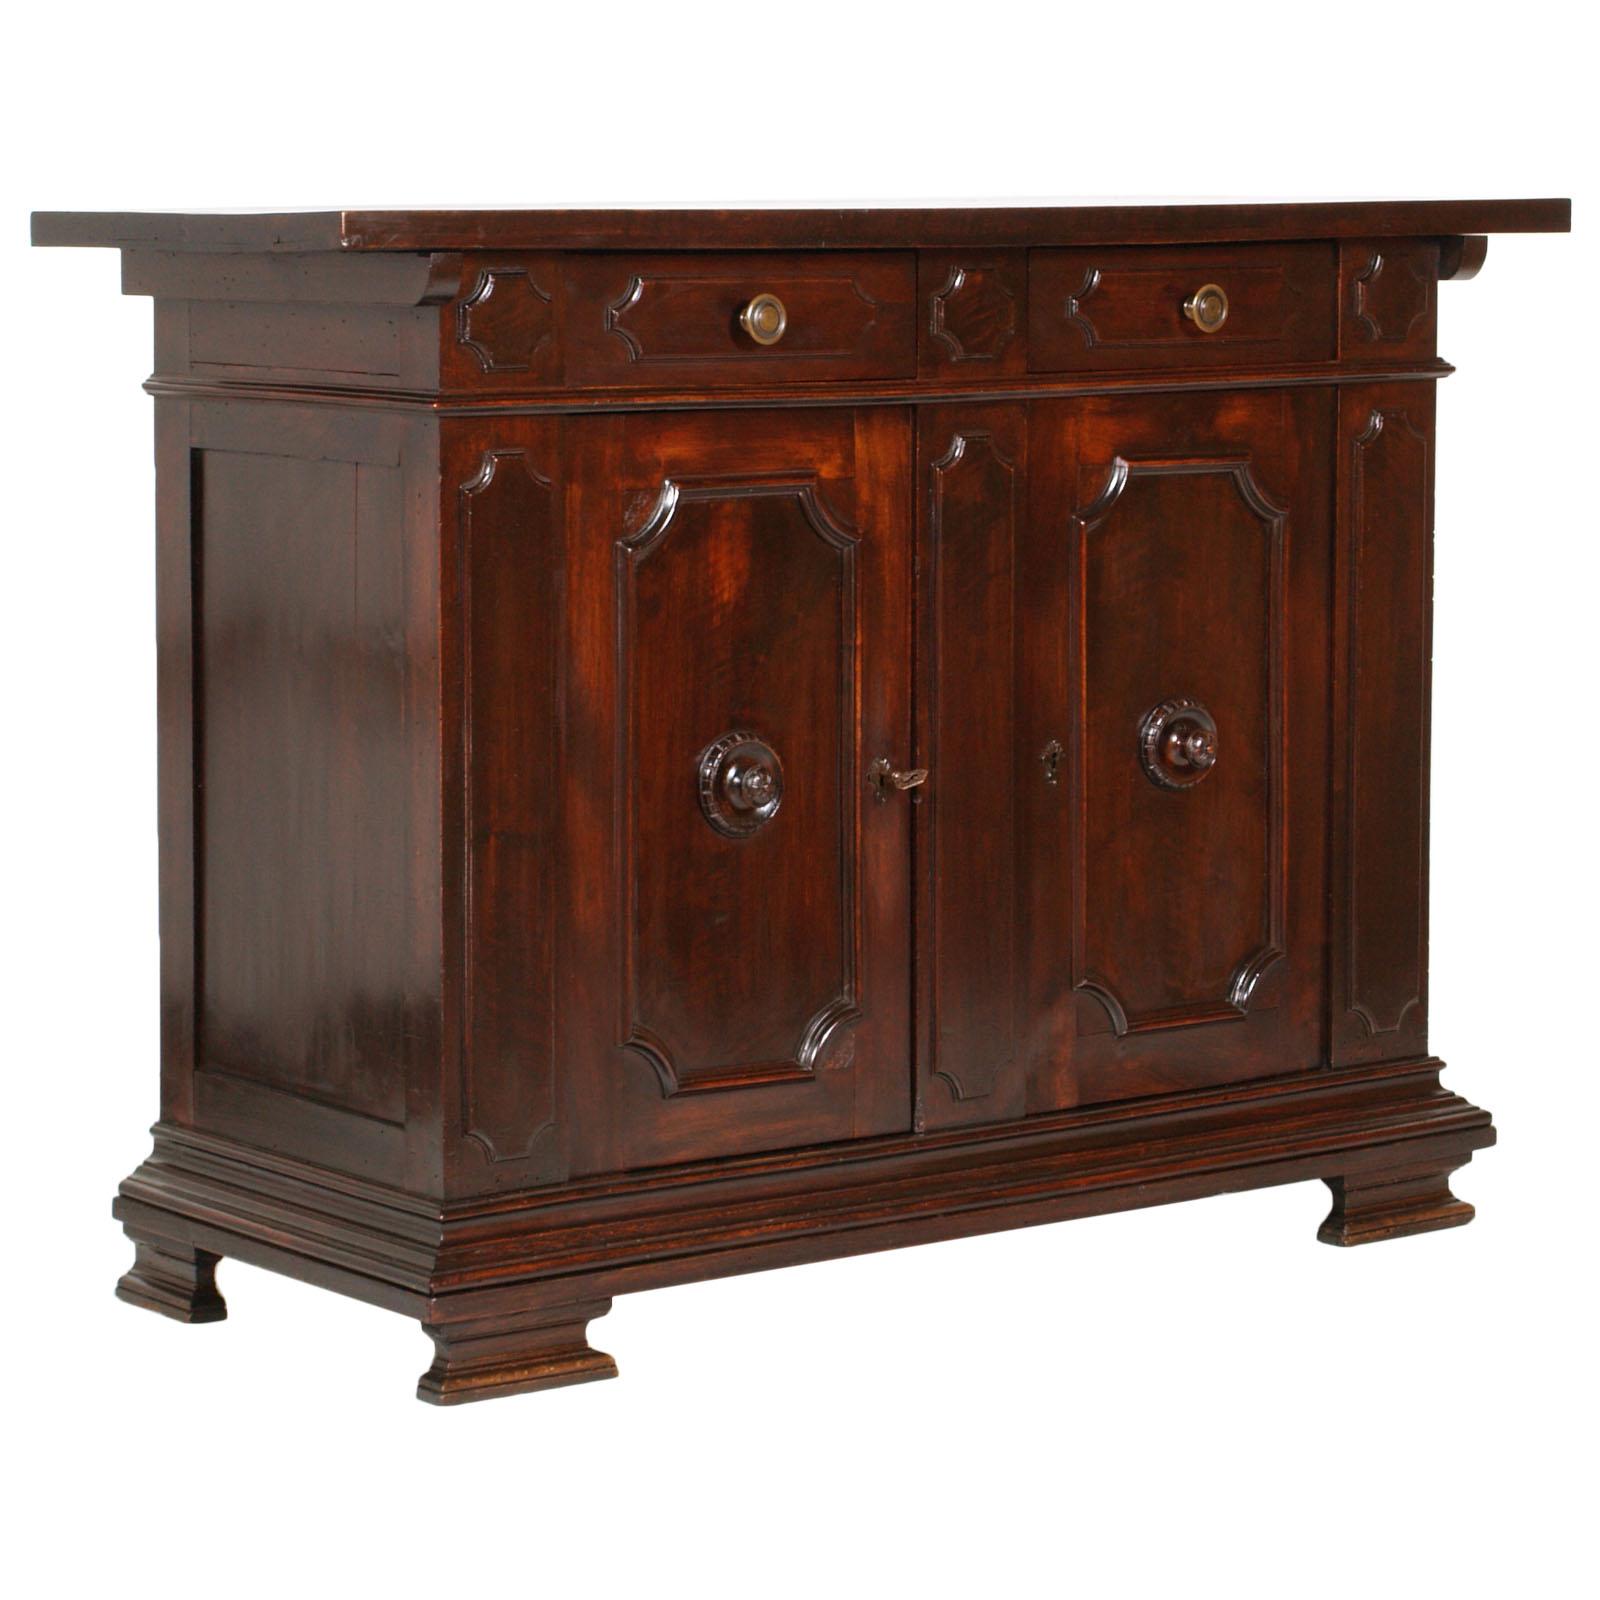 Tuscany Renaissance Credenza Sideboard by Dini & Puccini, 1928, in Solid Walnut For Sale